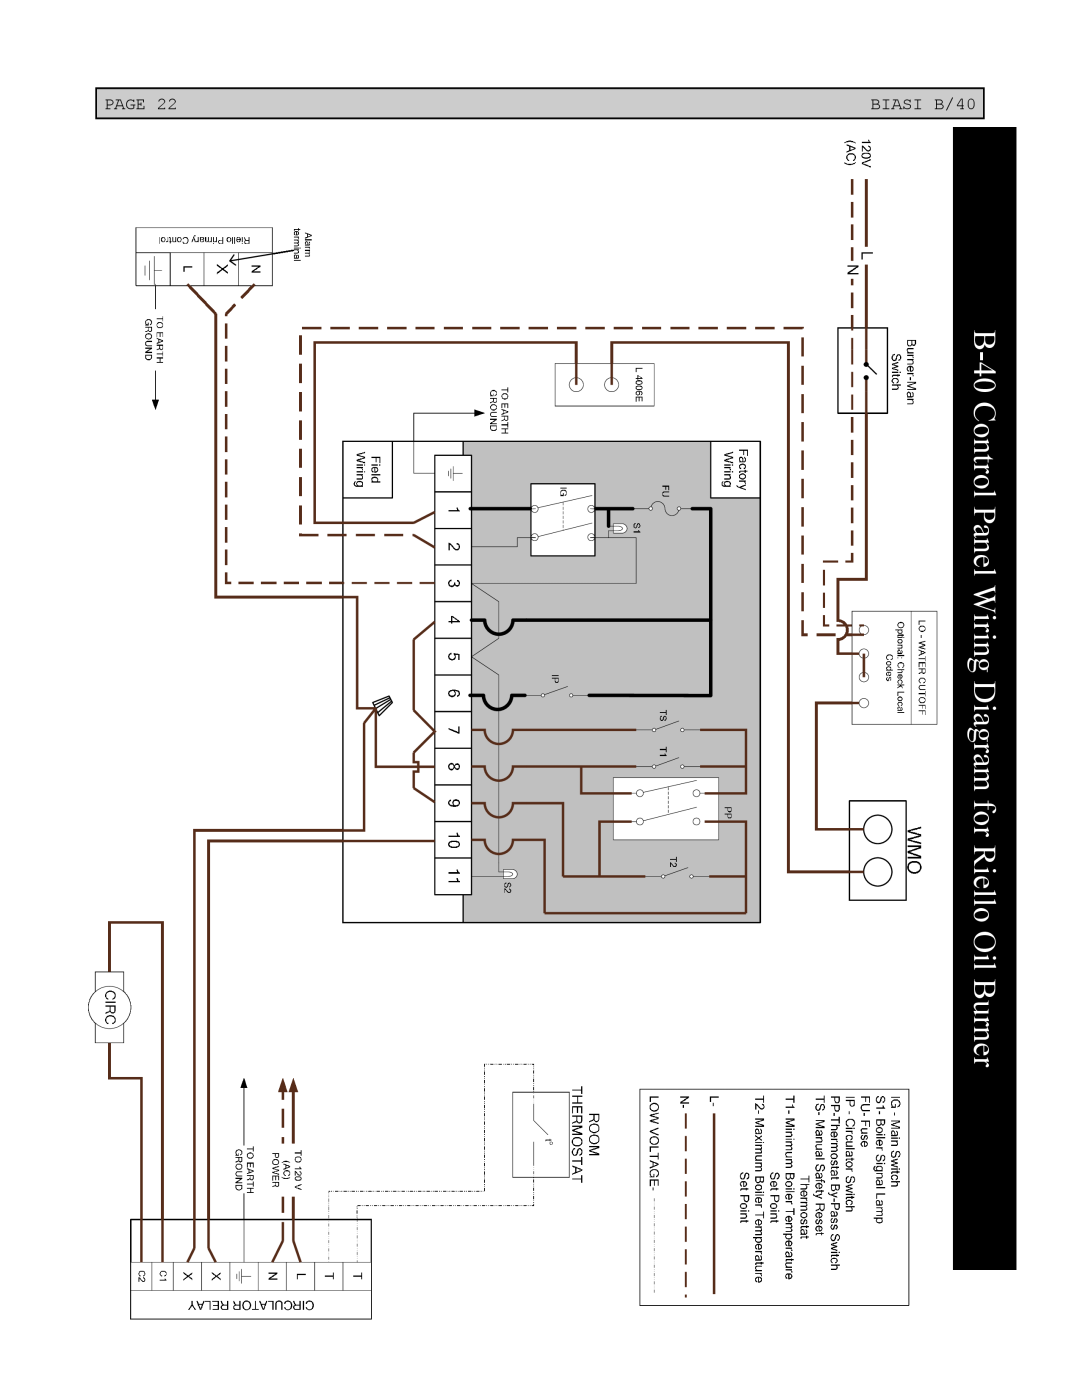 Linear Boiler installation instructions B-40 Control Panel Wiring Diagram for Riello Oil Burner, Page, BIASI B/40 